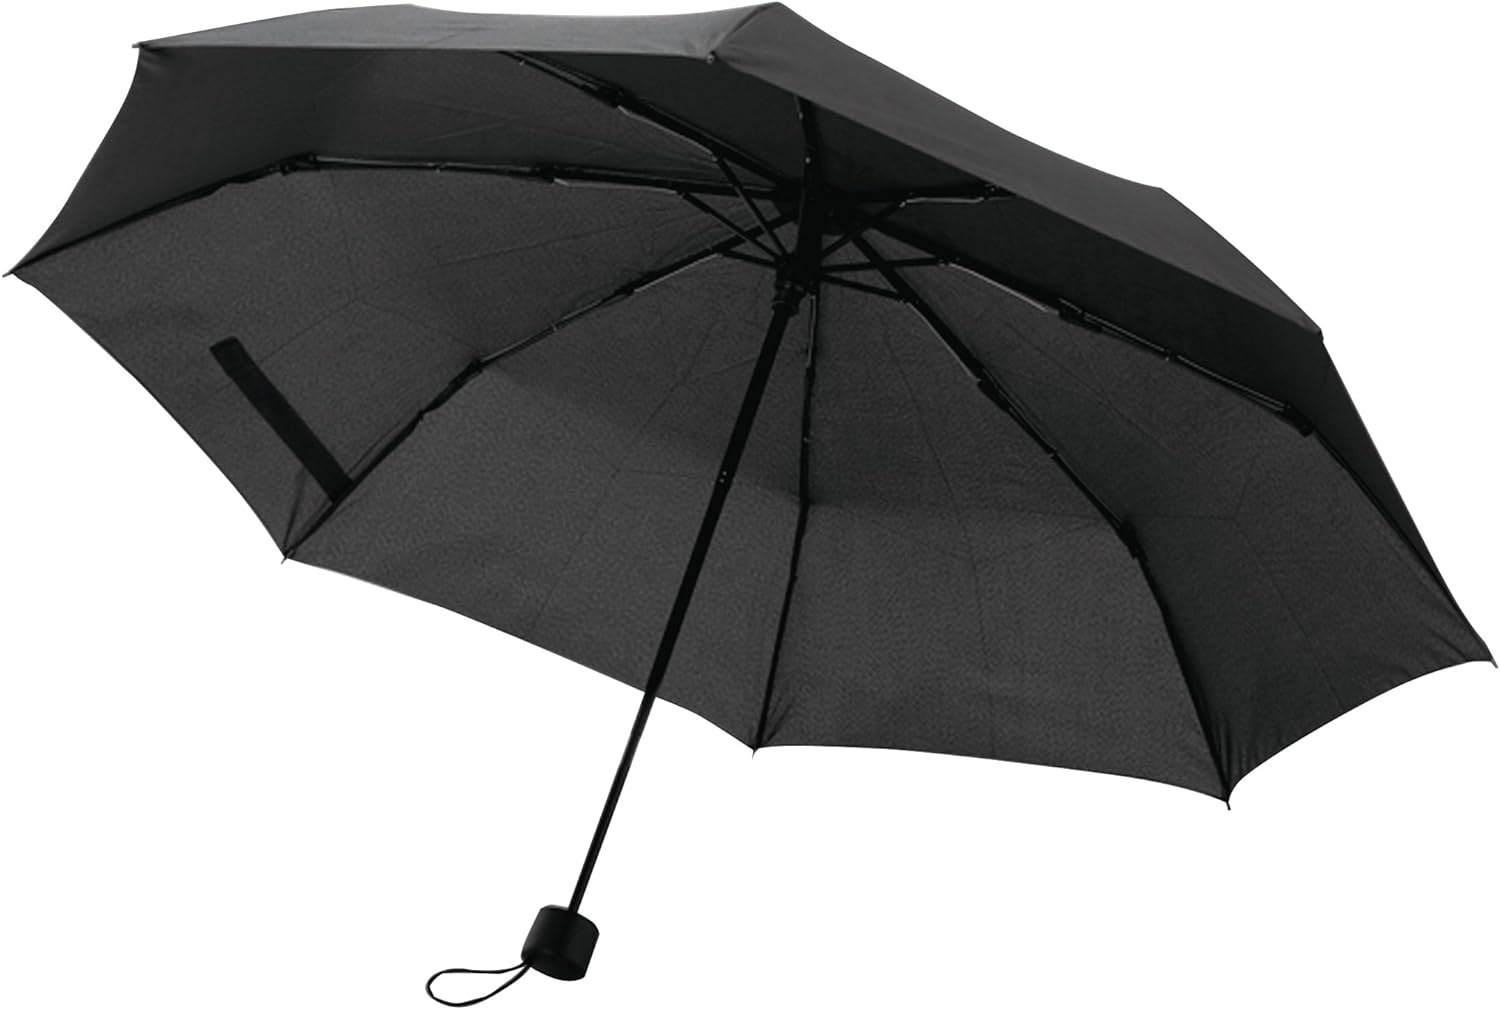 Fully Automatic Double Layer Windproof Rain Umbrella for Men and Women